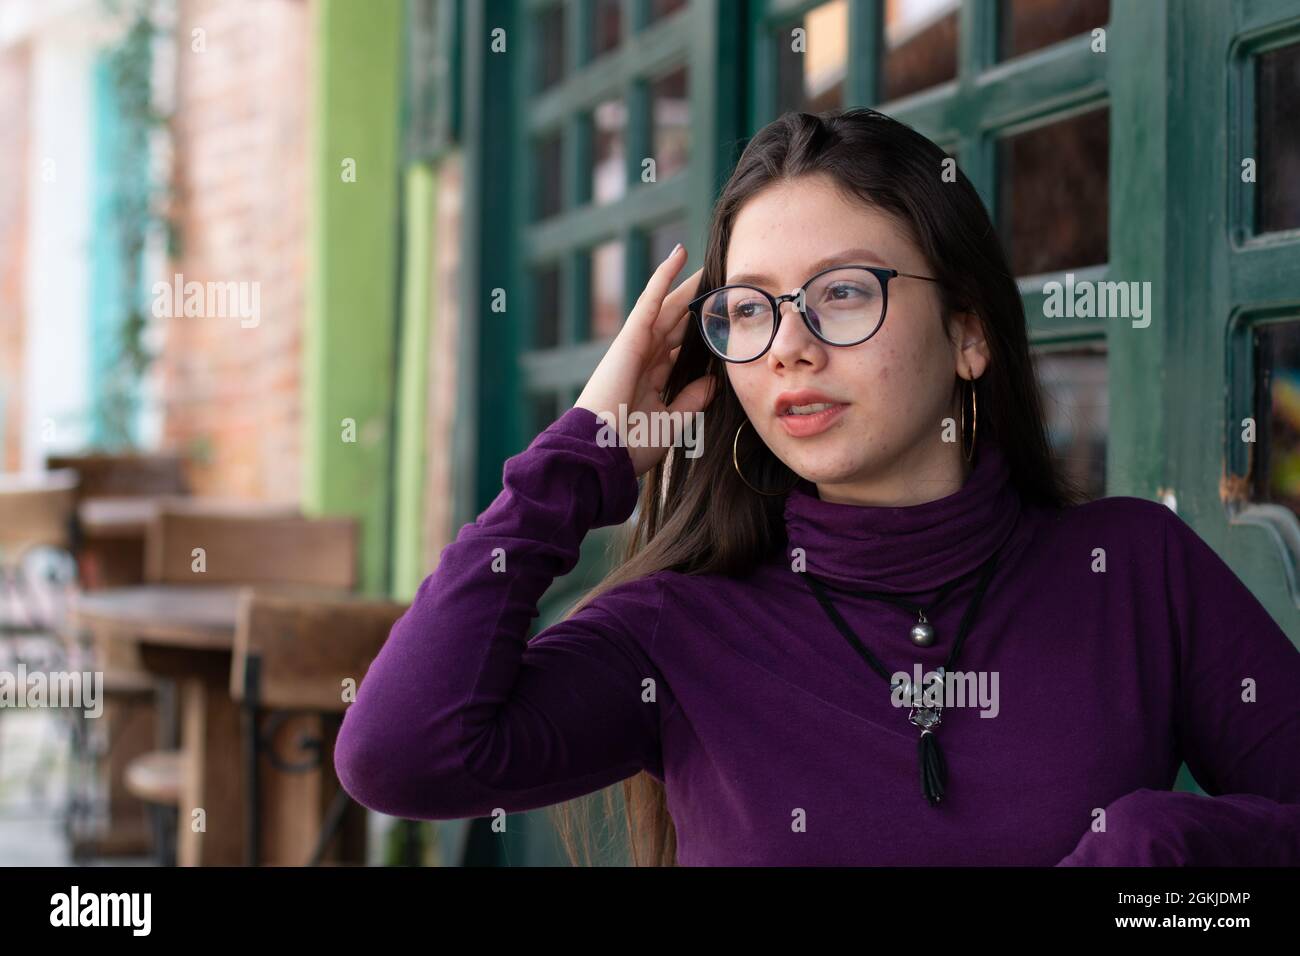 Teenager with acen posing confidently in urban street. Concept of awkward years. Stock Photo